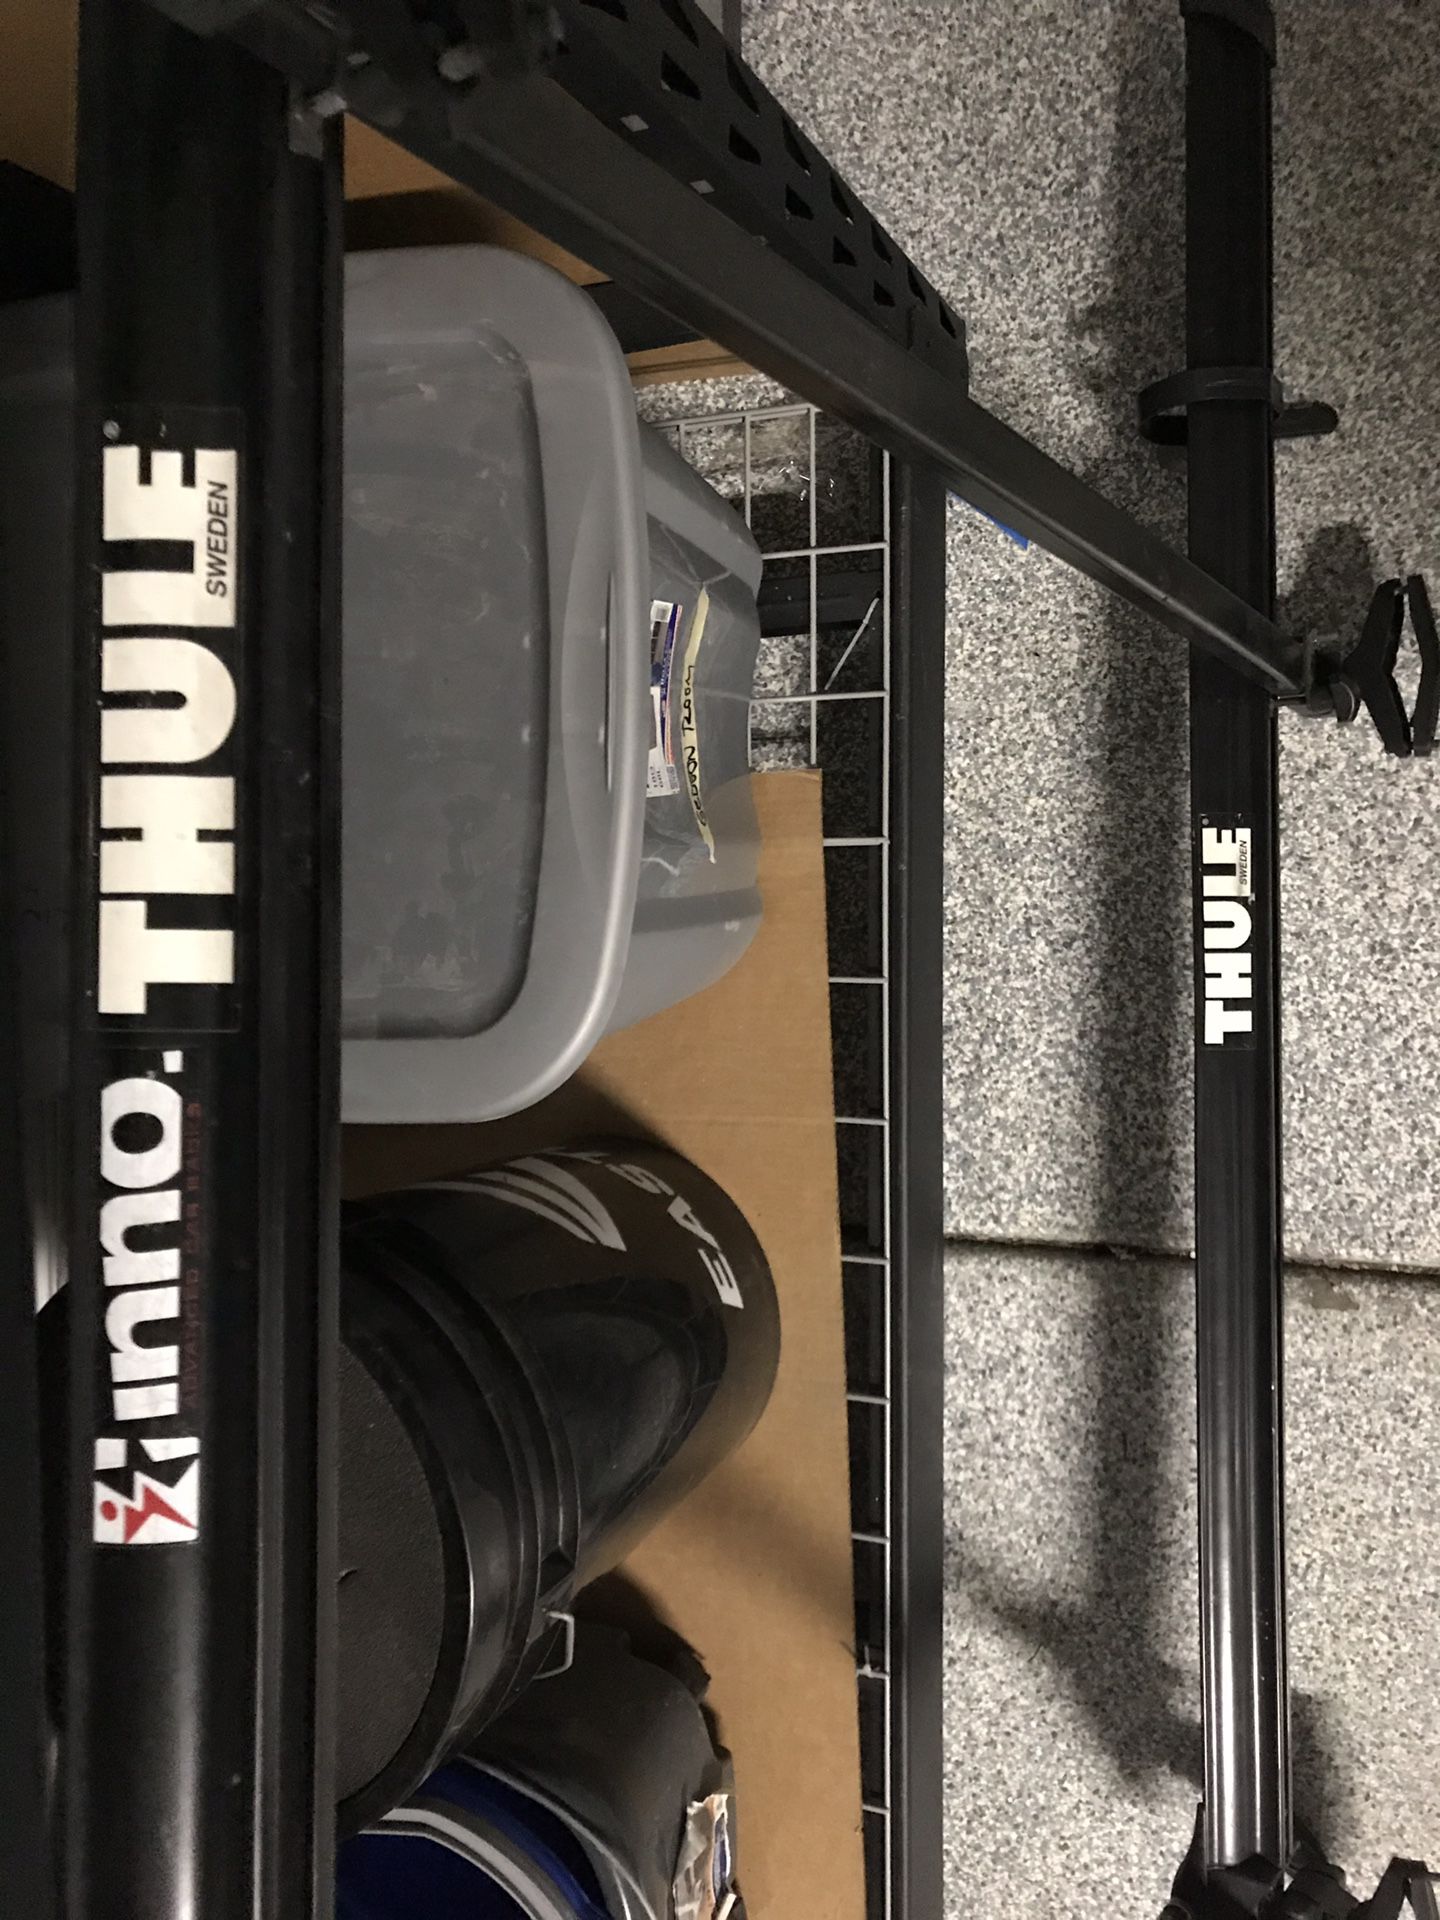 Thule Roof Top 2 Bike Rack & Thule cross bars (2) ready to fit right on your existing cross bars!